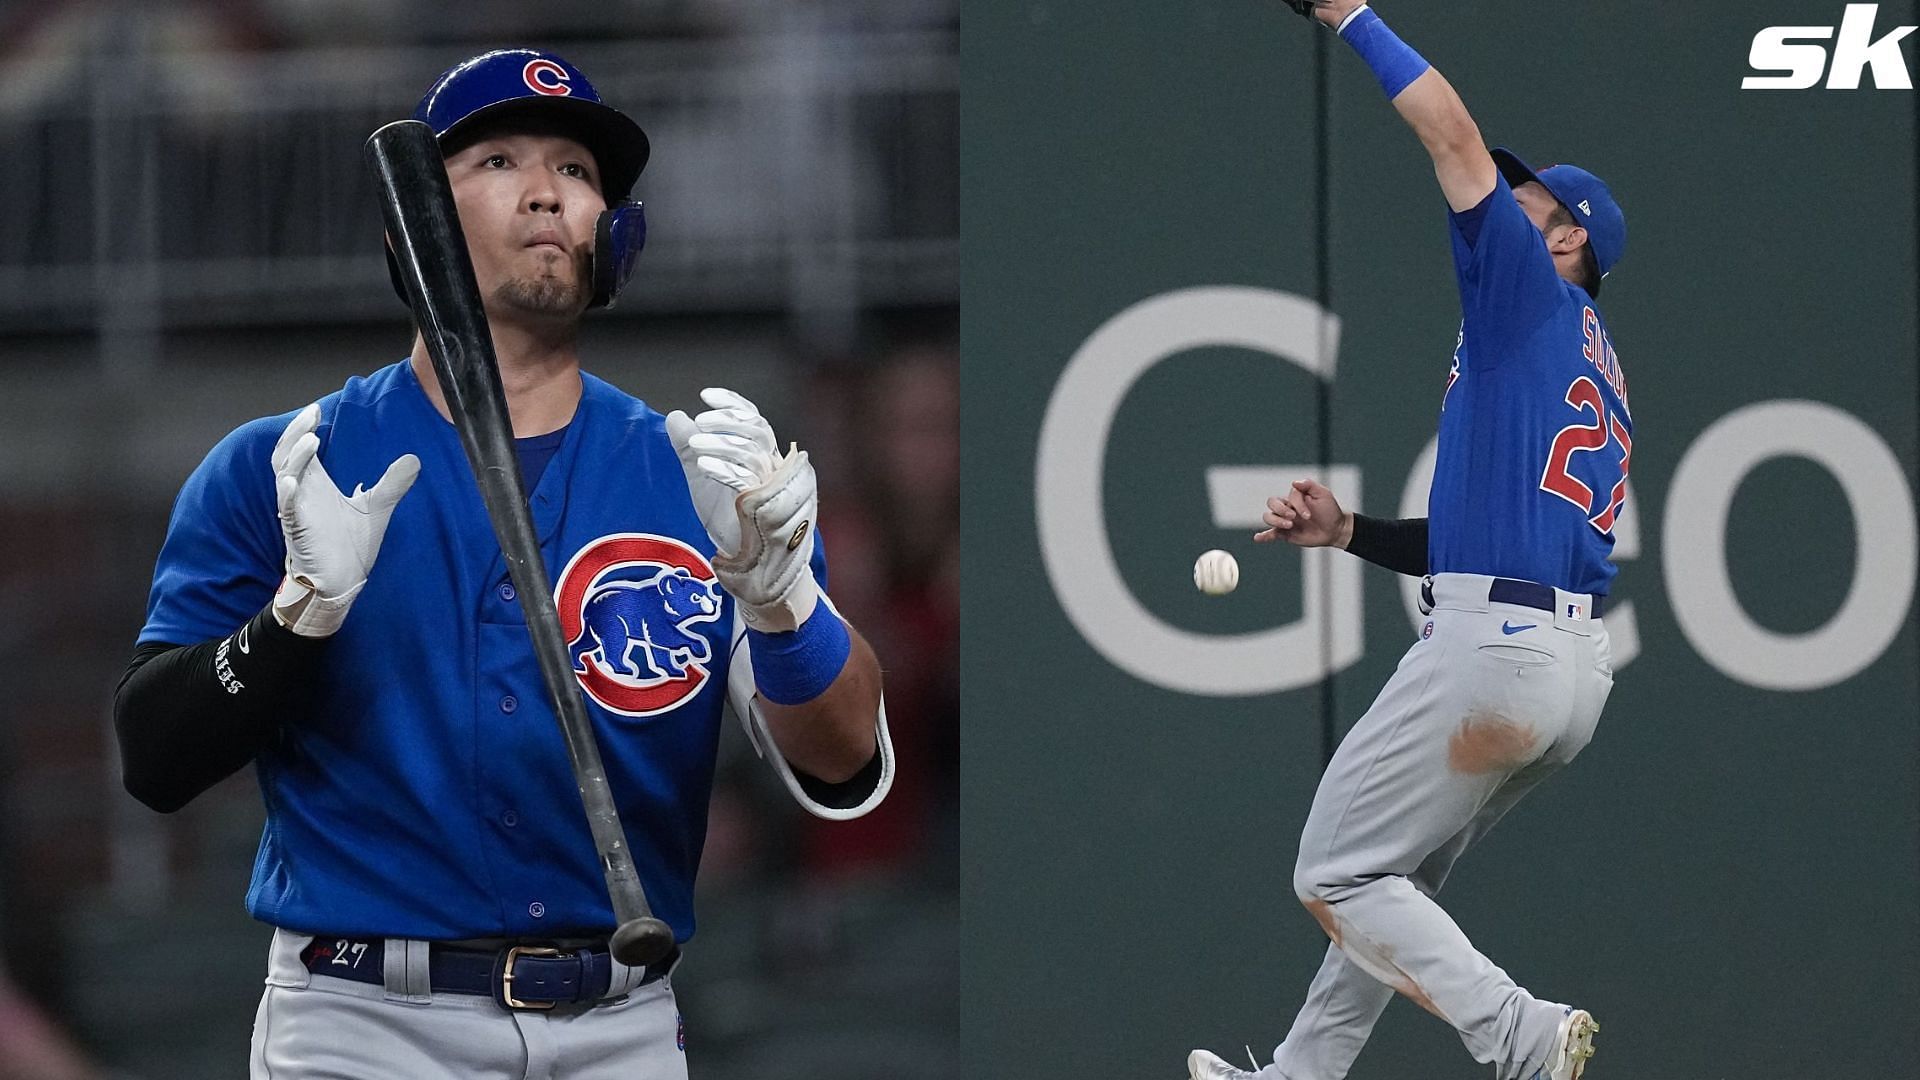 Cubs' Playoff Hopes In Danger After Loss But Seiya Suzuki Not To Blame